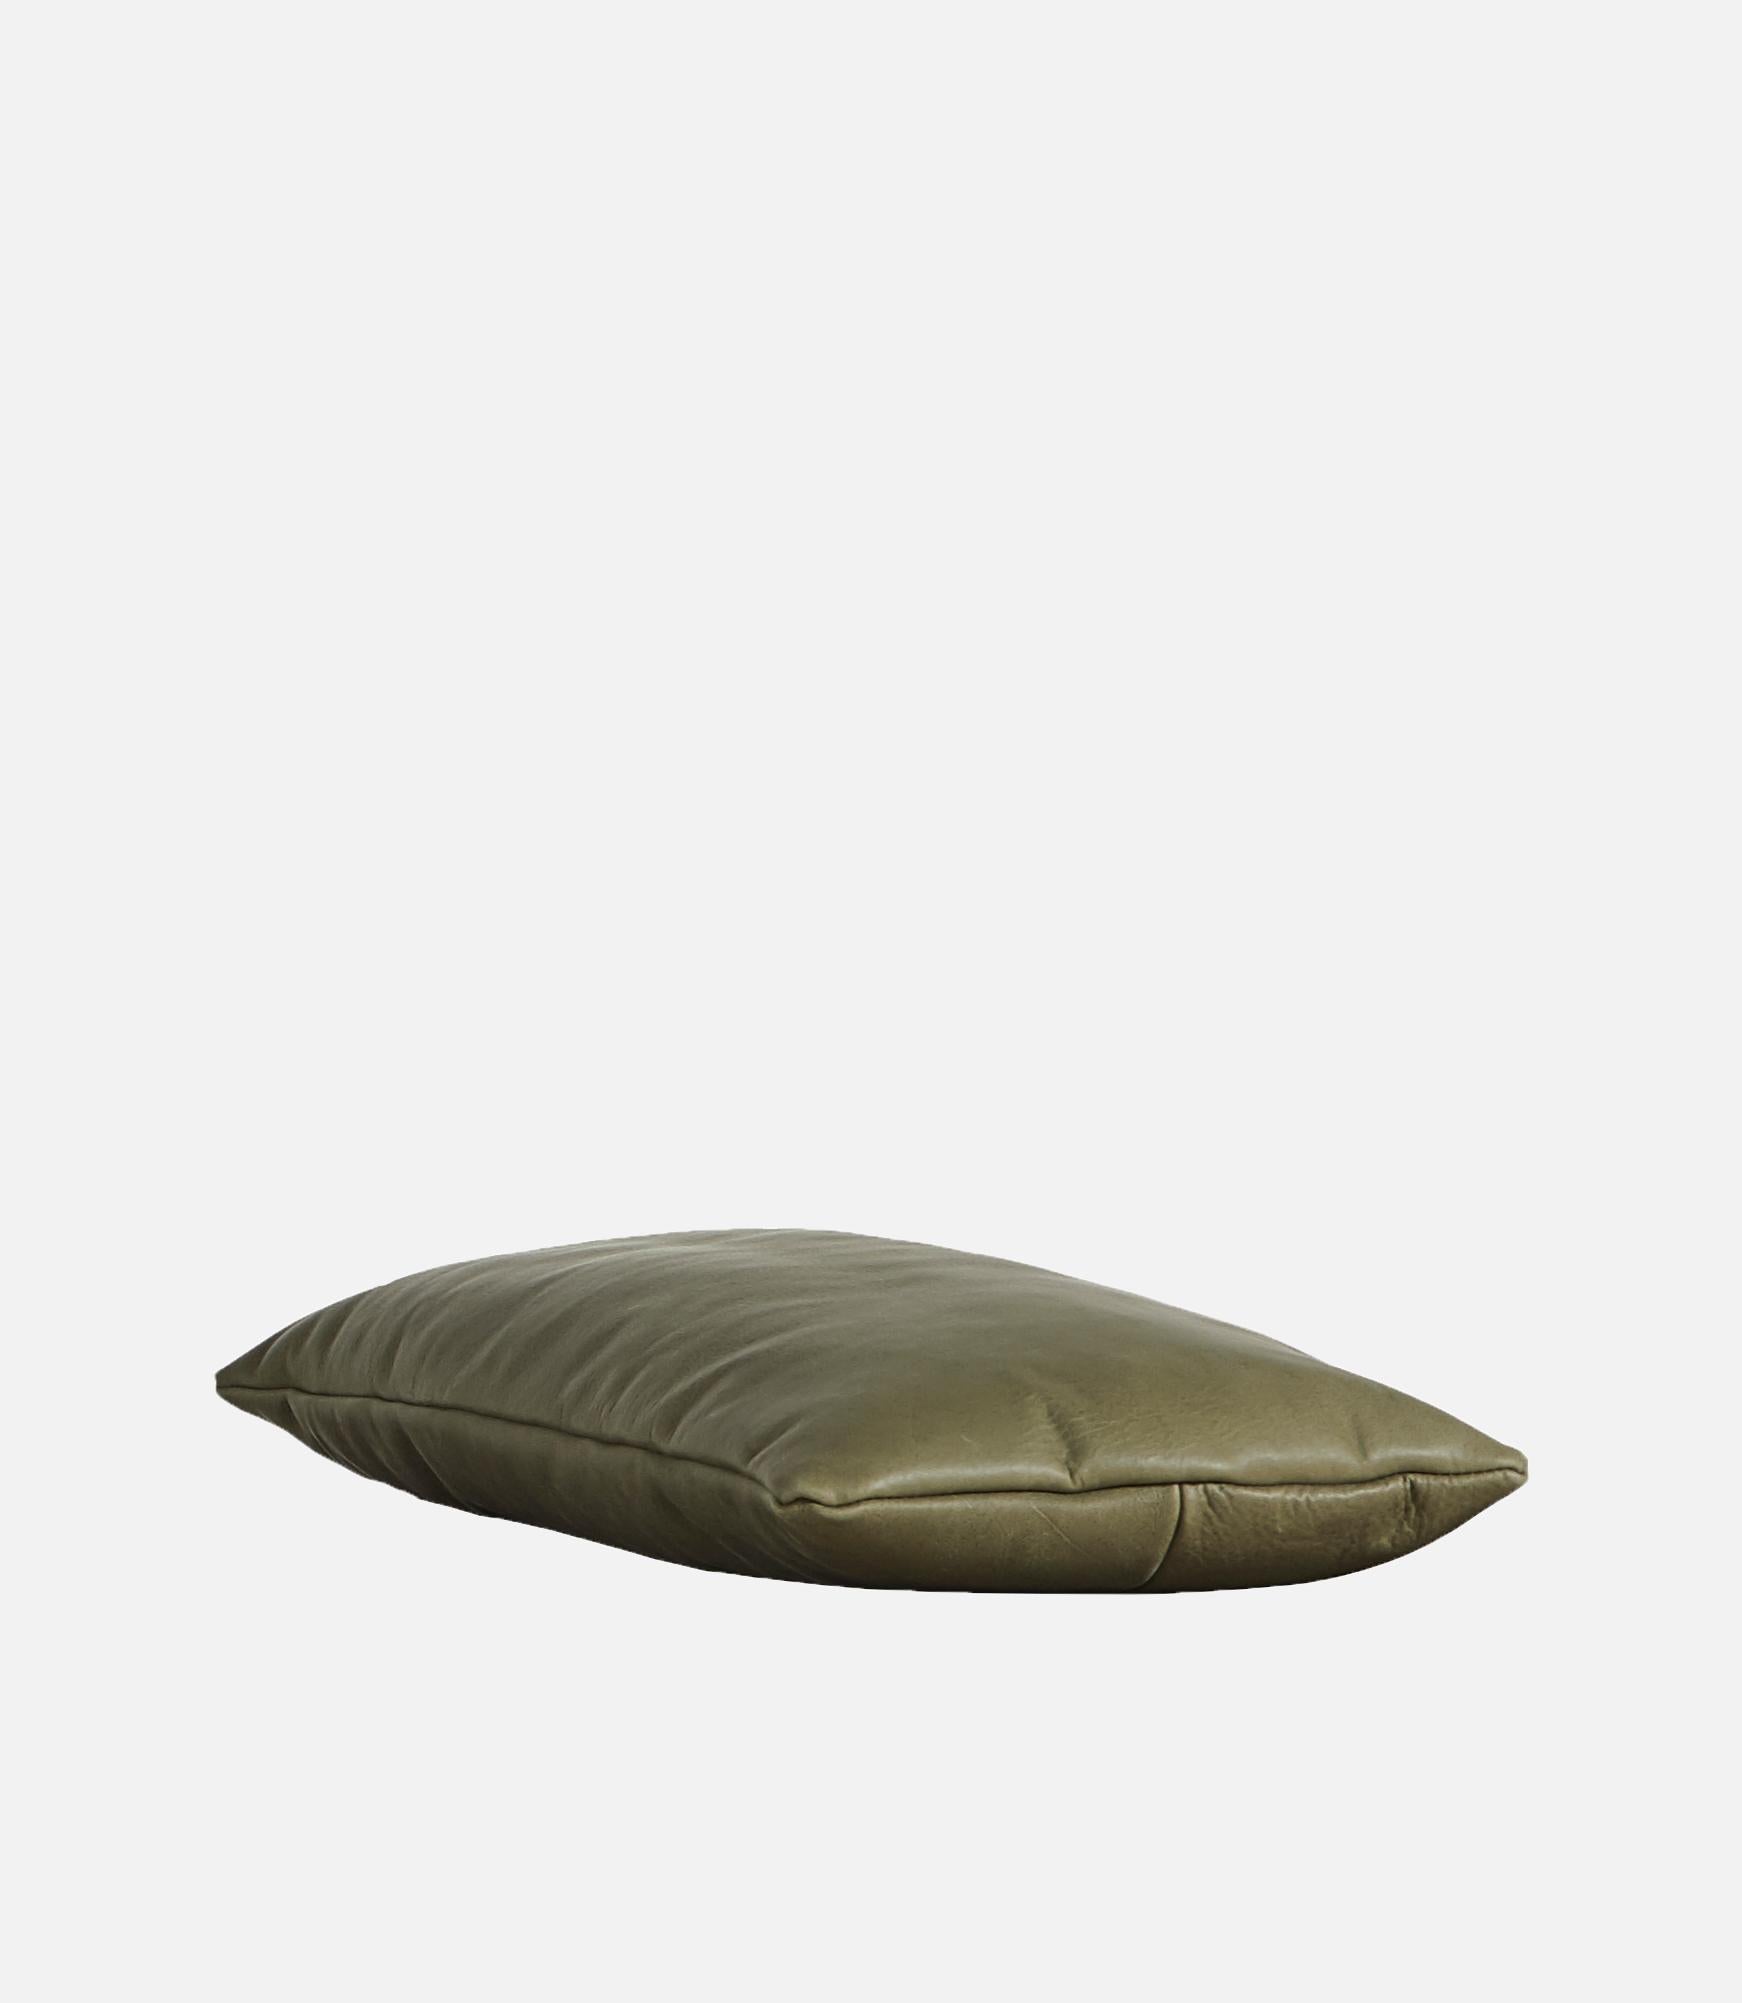 Moss Green Leather Level Pillow by Msds Studio
Materials: Camo Leather, Fabric
Dimensions: D 23.5 x W 67 x H 8.5 cm

The founders, Mia and Torben Koed, decided to put their 30 years of experience into a new project. It was time for a change and a